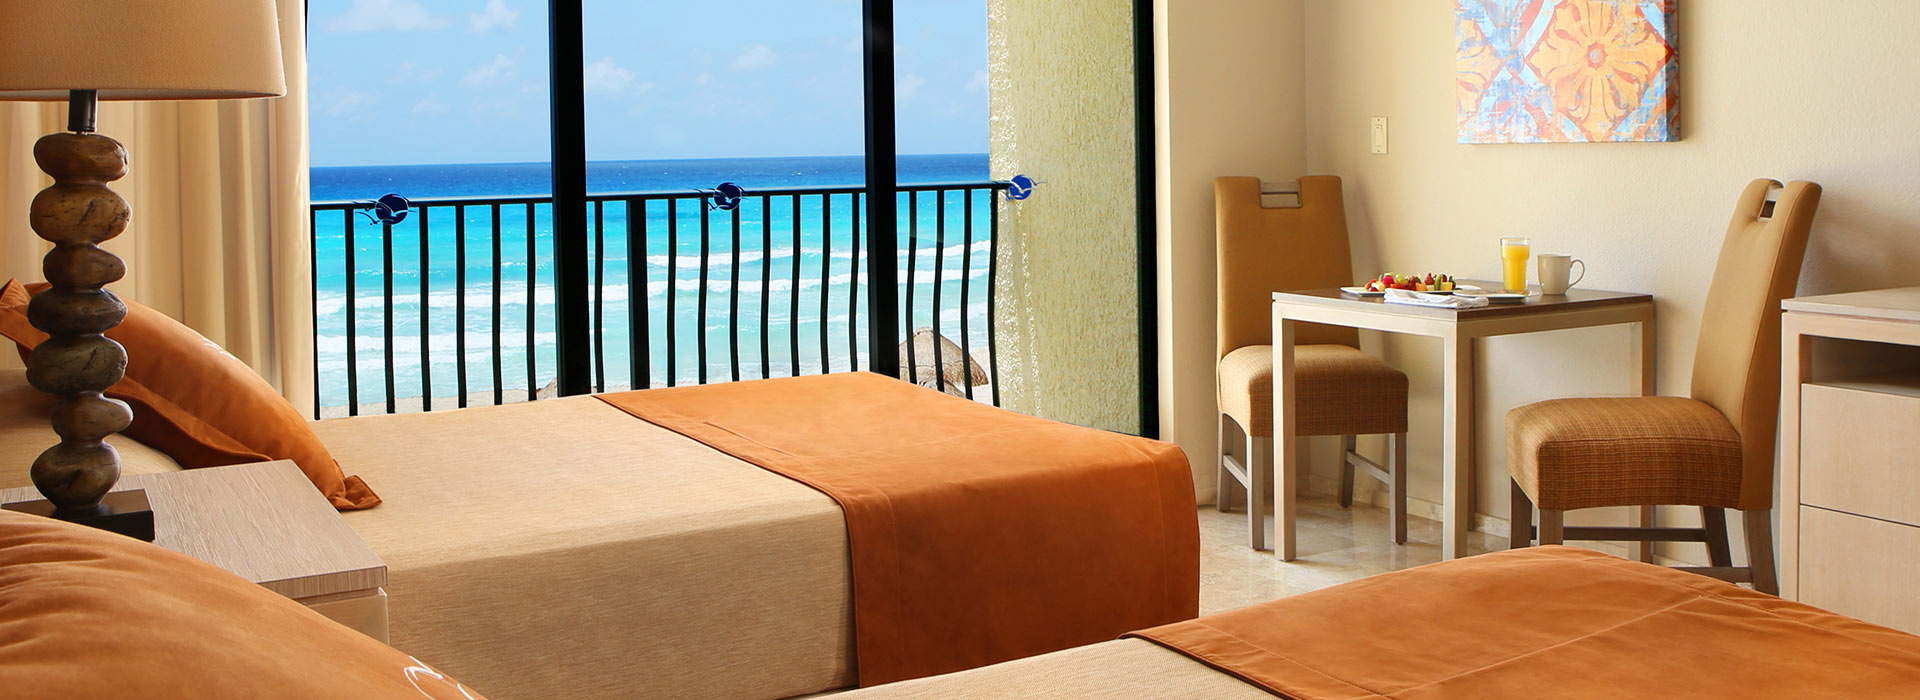 Ocean View Junior suite with ample seating area by the Mexican Caribbean Sea